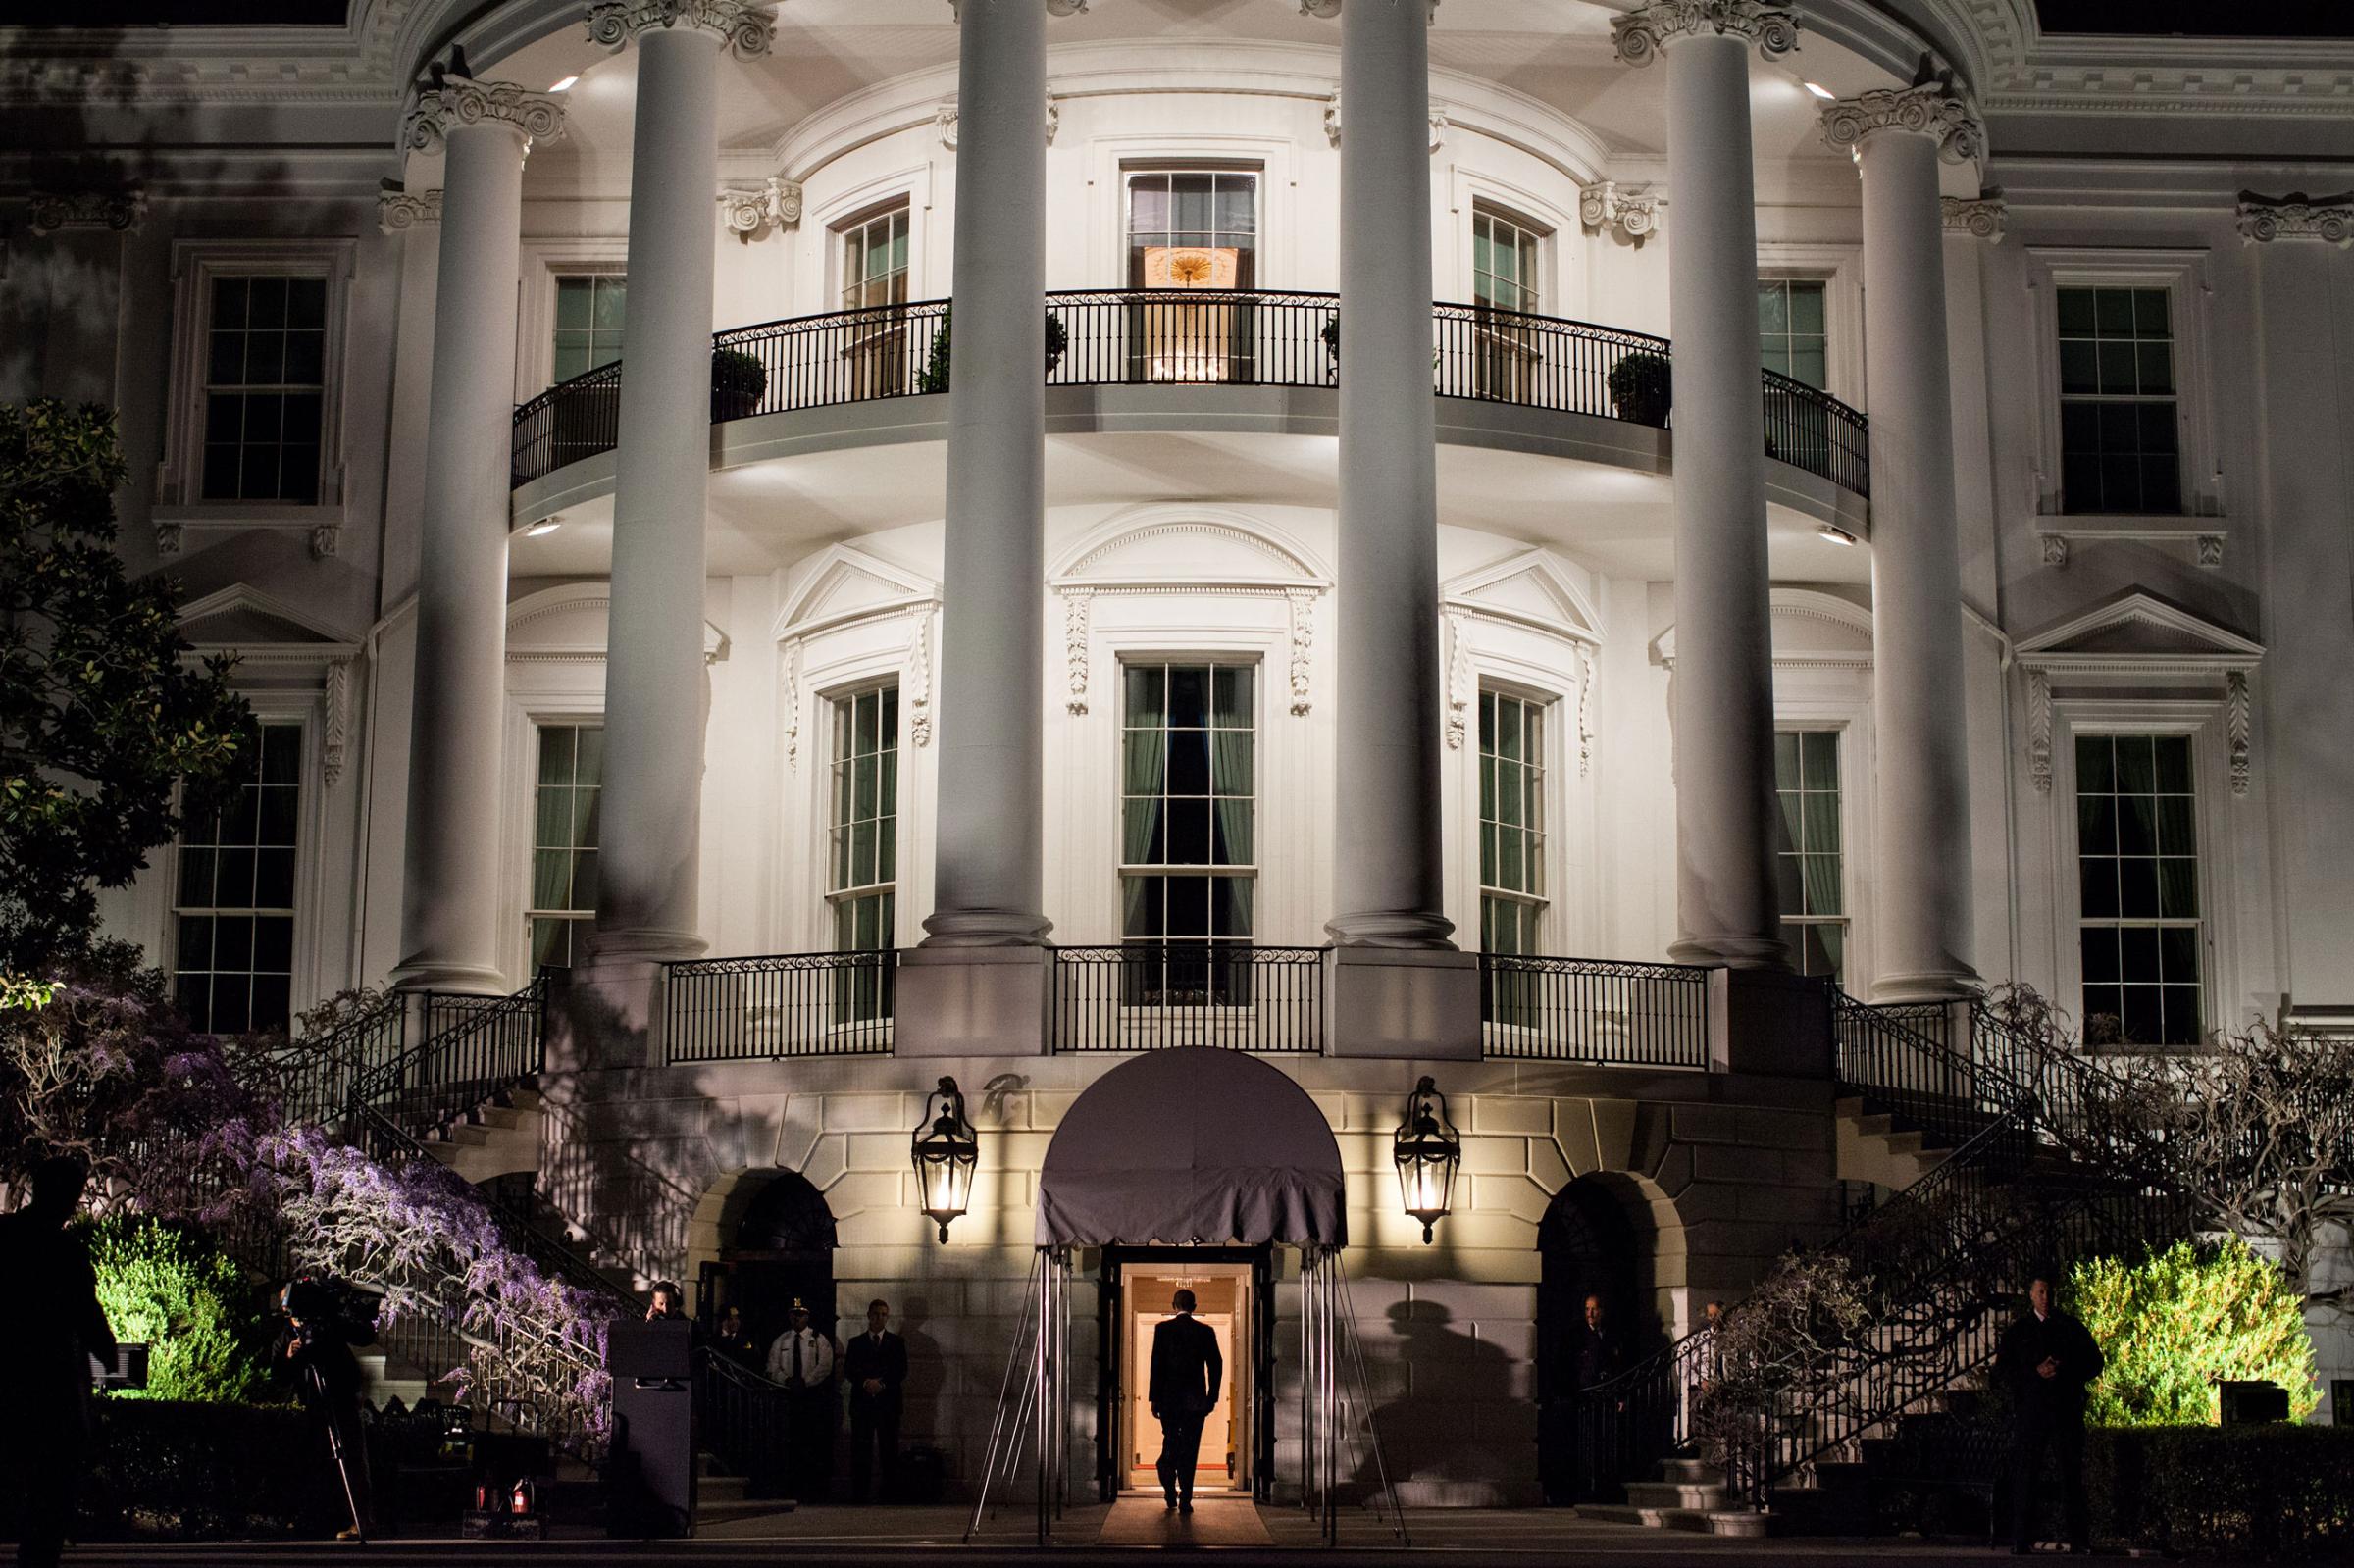 President Obama enters the White House at the South Portico following his arrival aboard Marine One on the South Lawn, March 30, 2012. The President returned from a trip to Vermont and Maine.